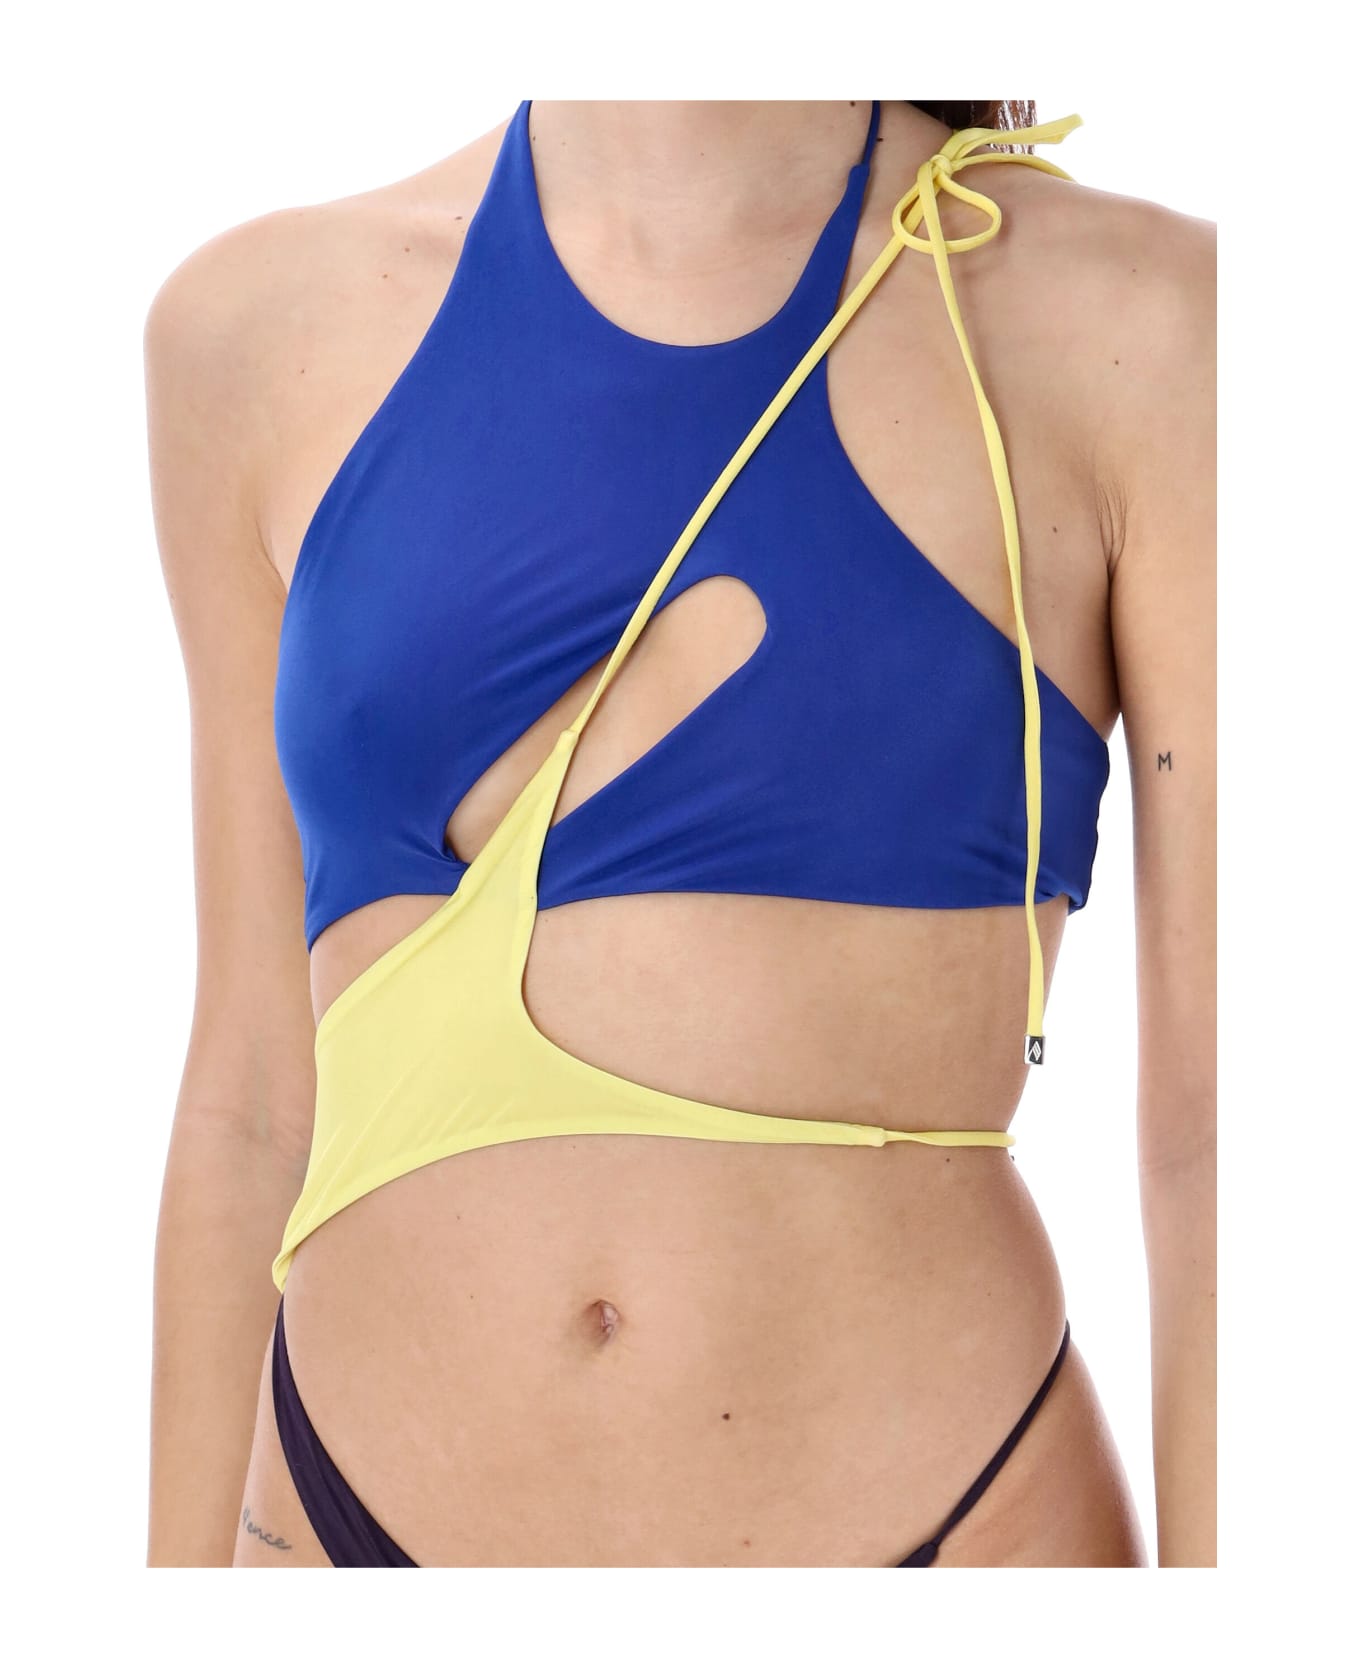 The Attico One Piece Cut Out Swimsuit - GRAPE BLUE YELLOW